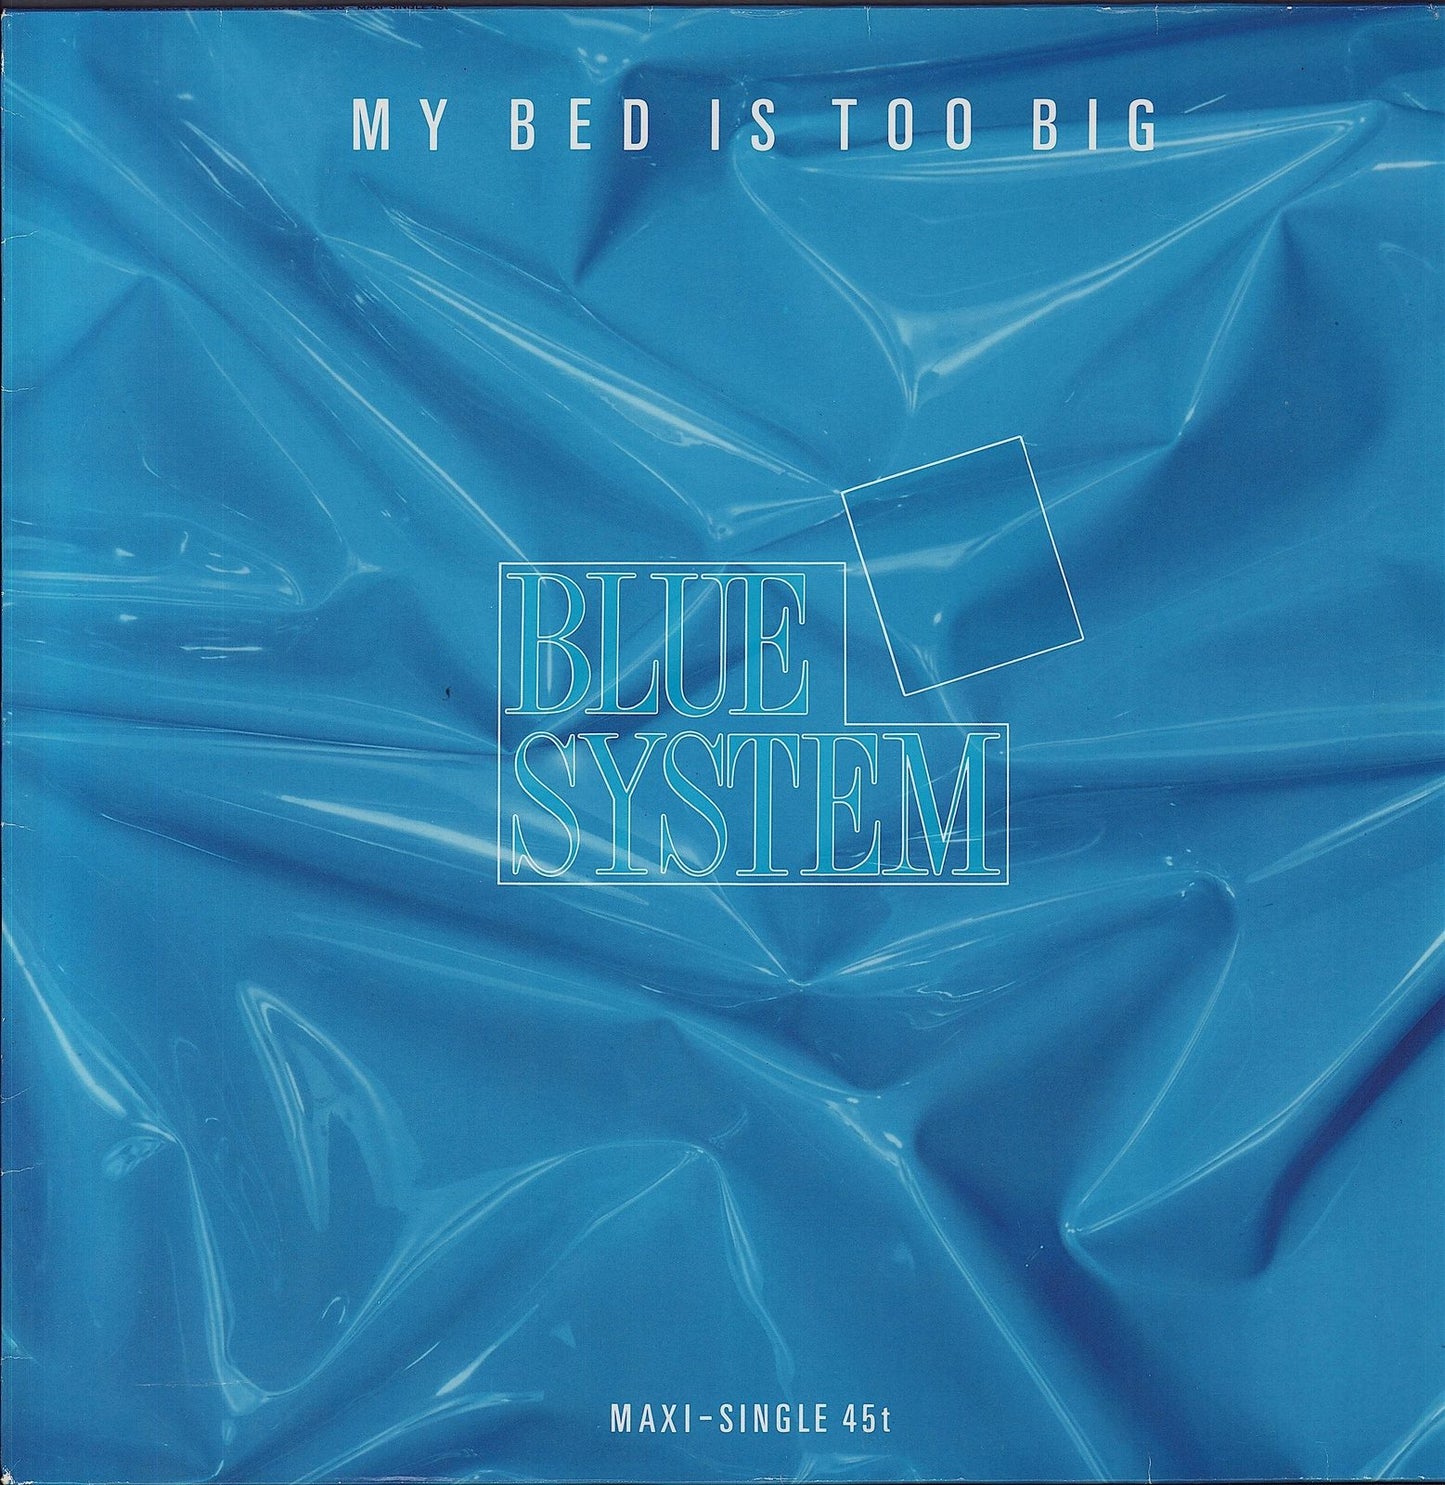 Blue System ‎- My Bed Is Too Big Vinyl 12"